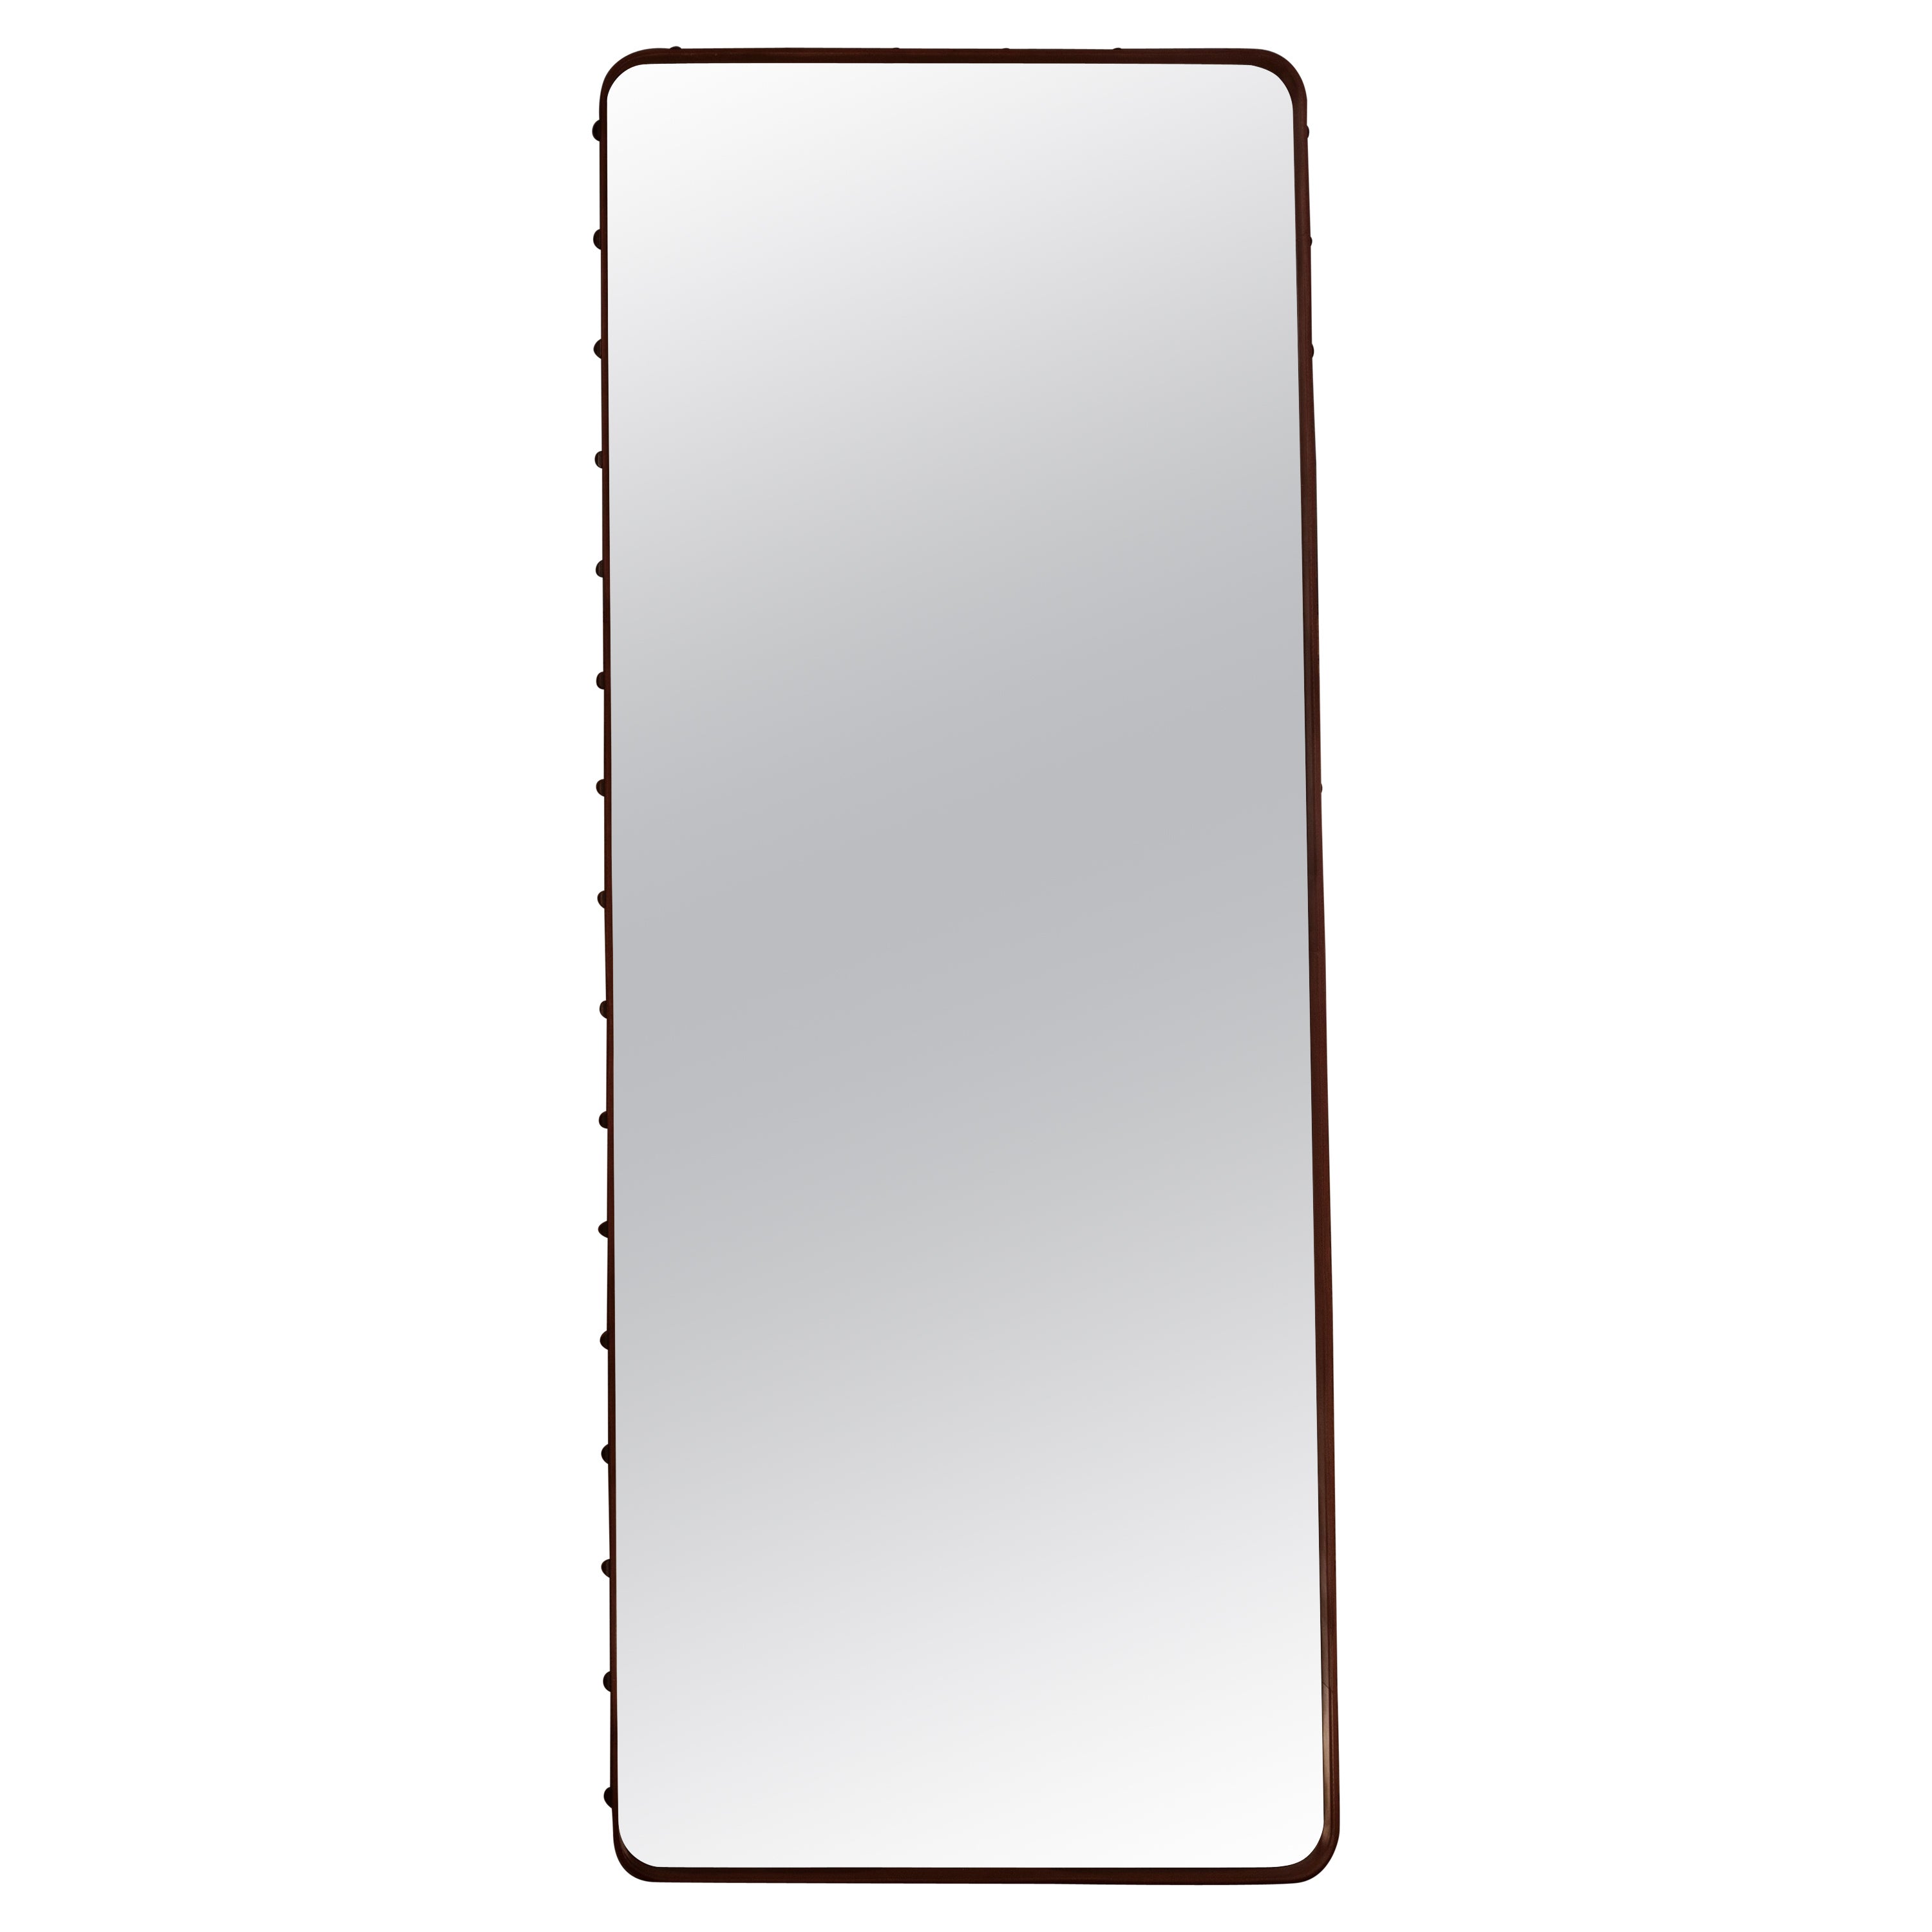 Contemporary Large Jacques Adnet 'Rectangulaire Mirror' Wall Mirror in Cream Leather for GUBI For Sale